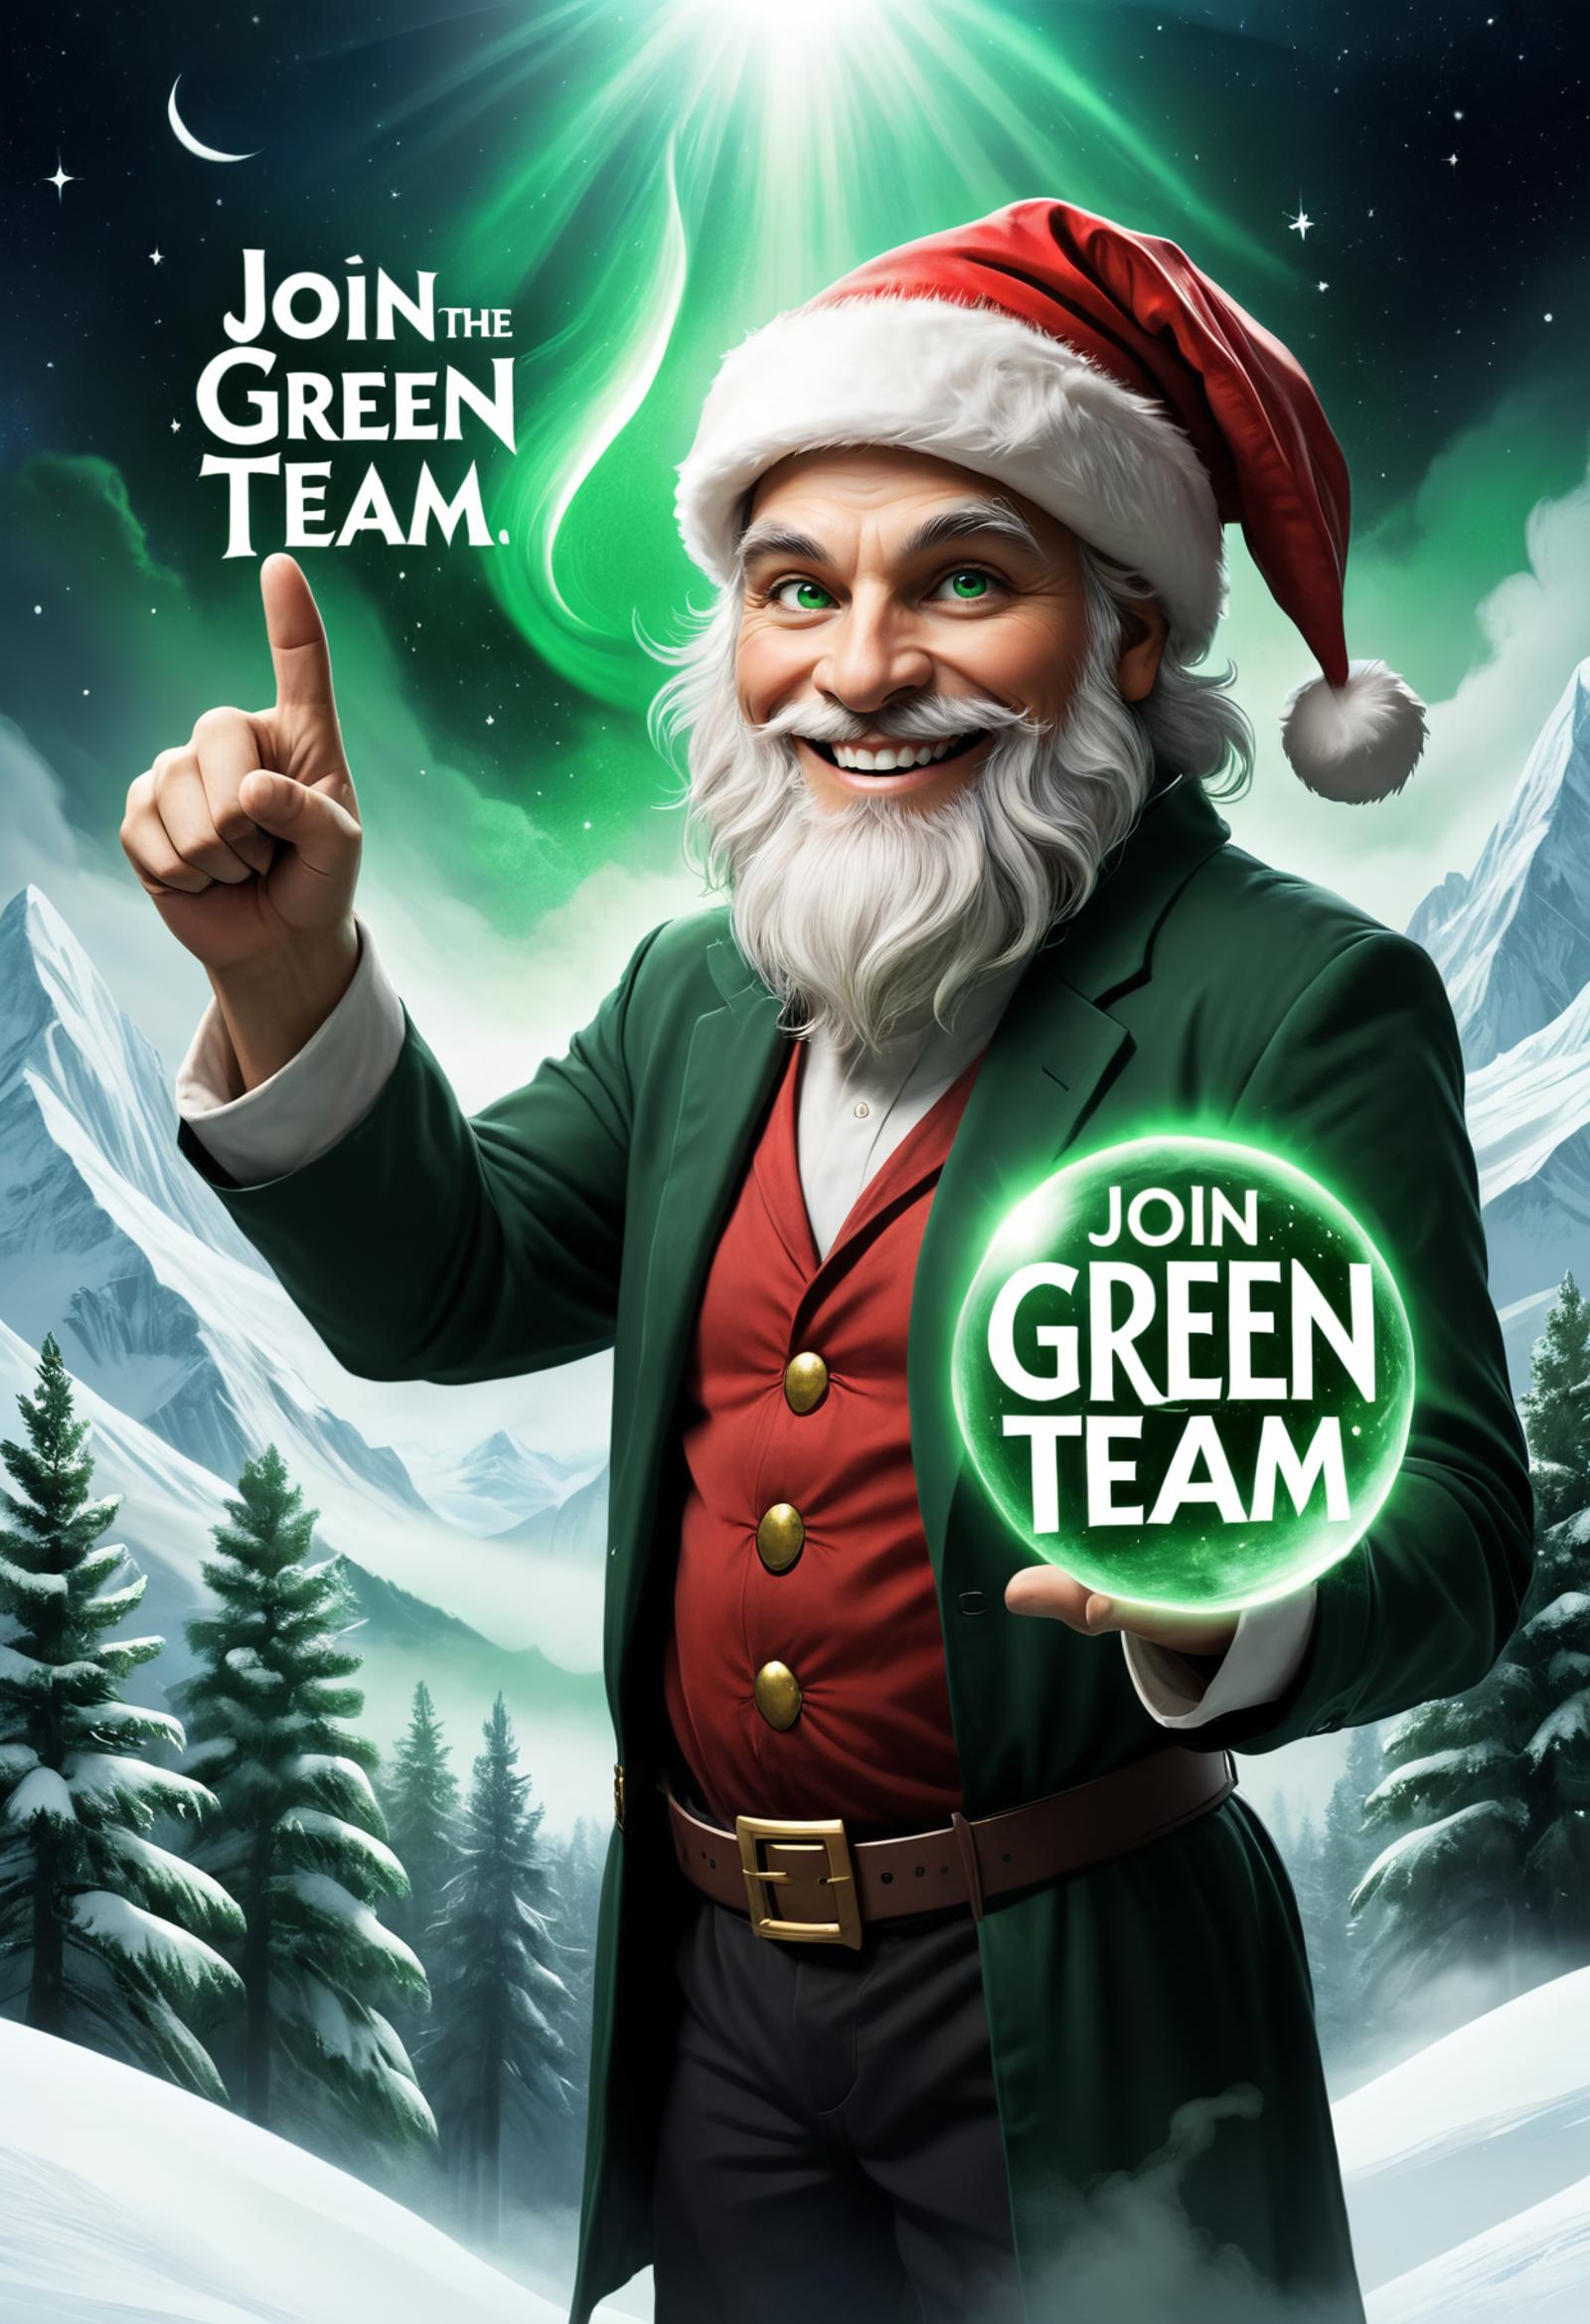 A cartoon Santa Claus in a green suit pointing to a green ball that says "Join Green Team".